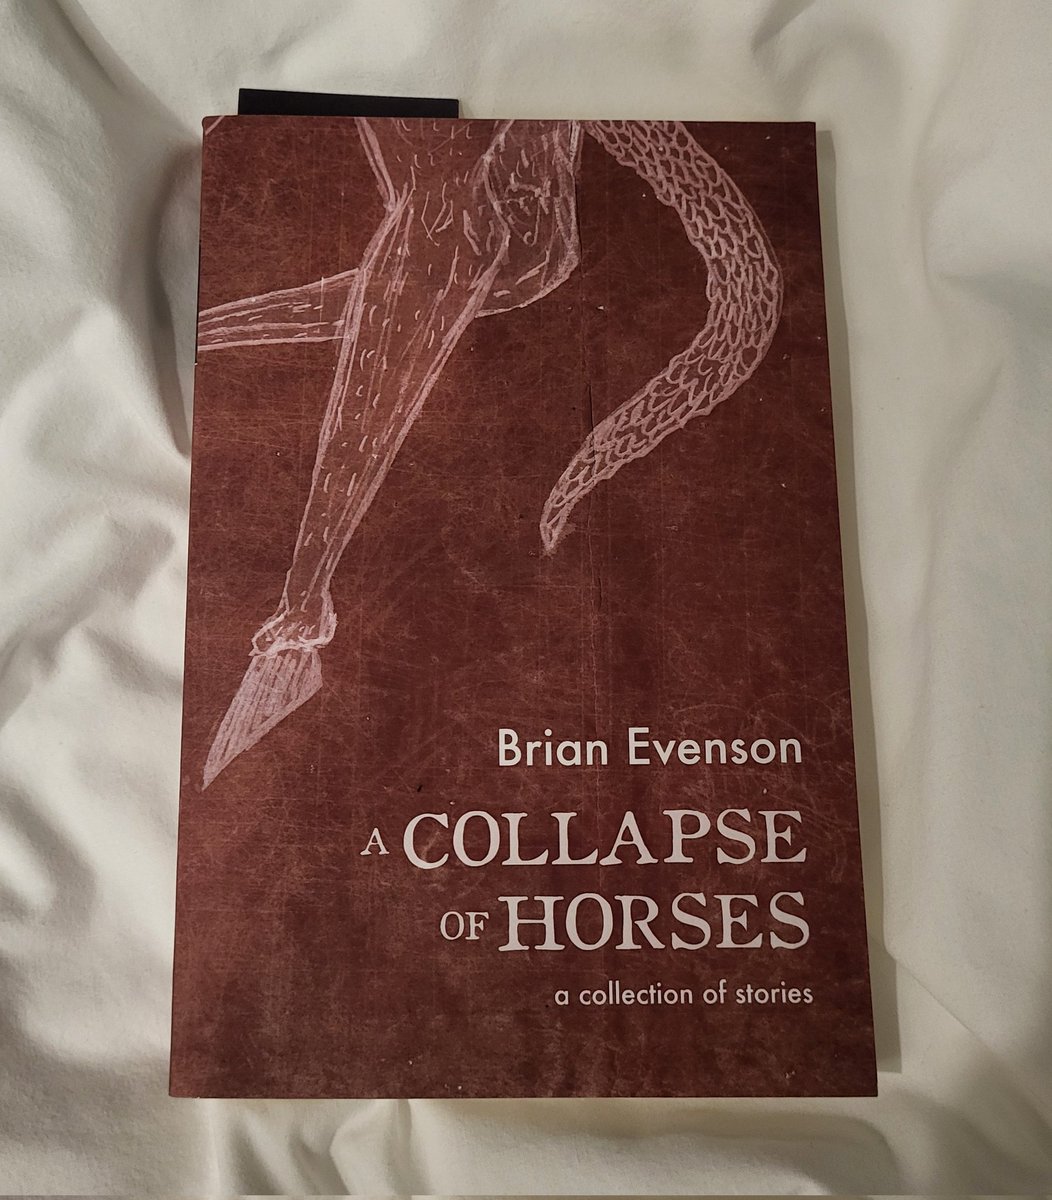 Brian Evenson is amazing. That is all.